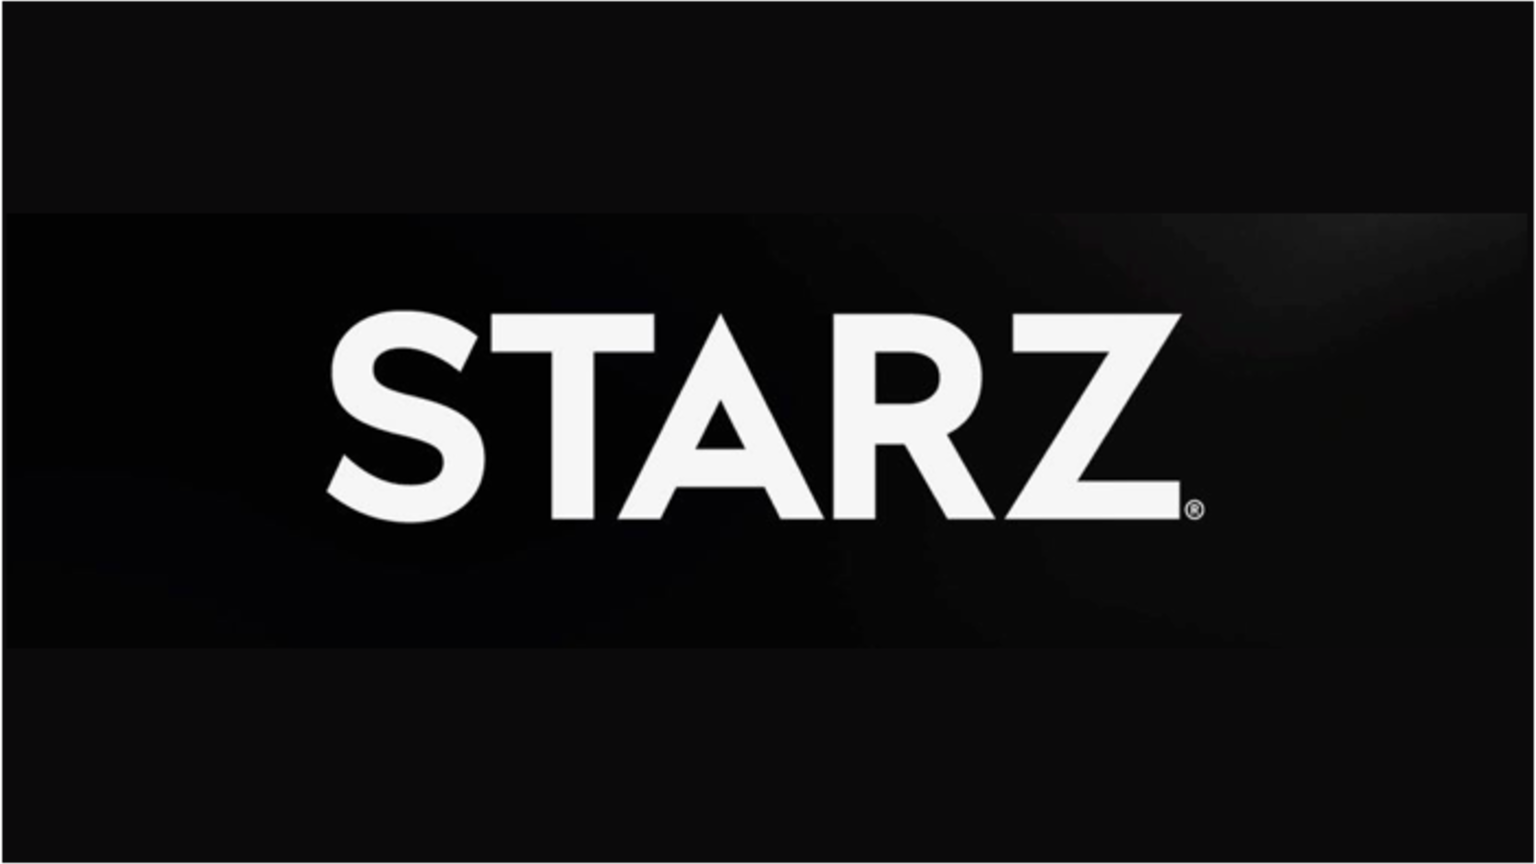 DEAL ALERT Get 6 Months of STARZ for Only 25 (55 OFF) The Streamable